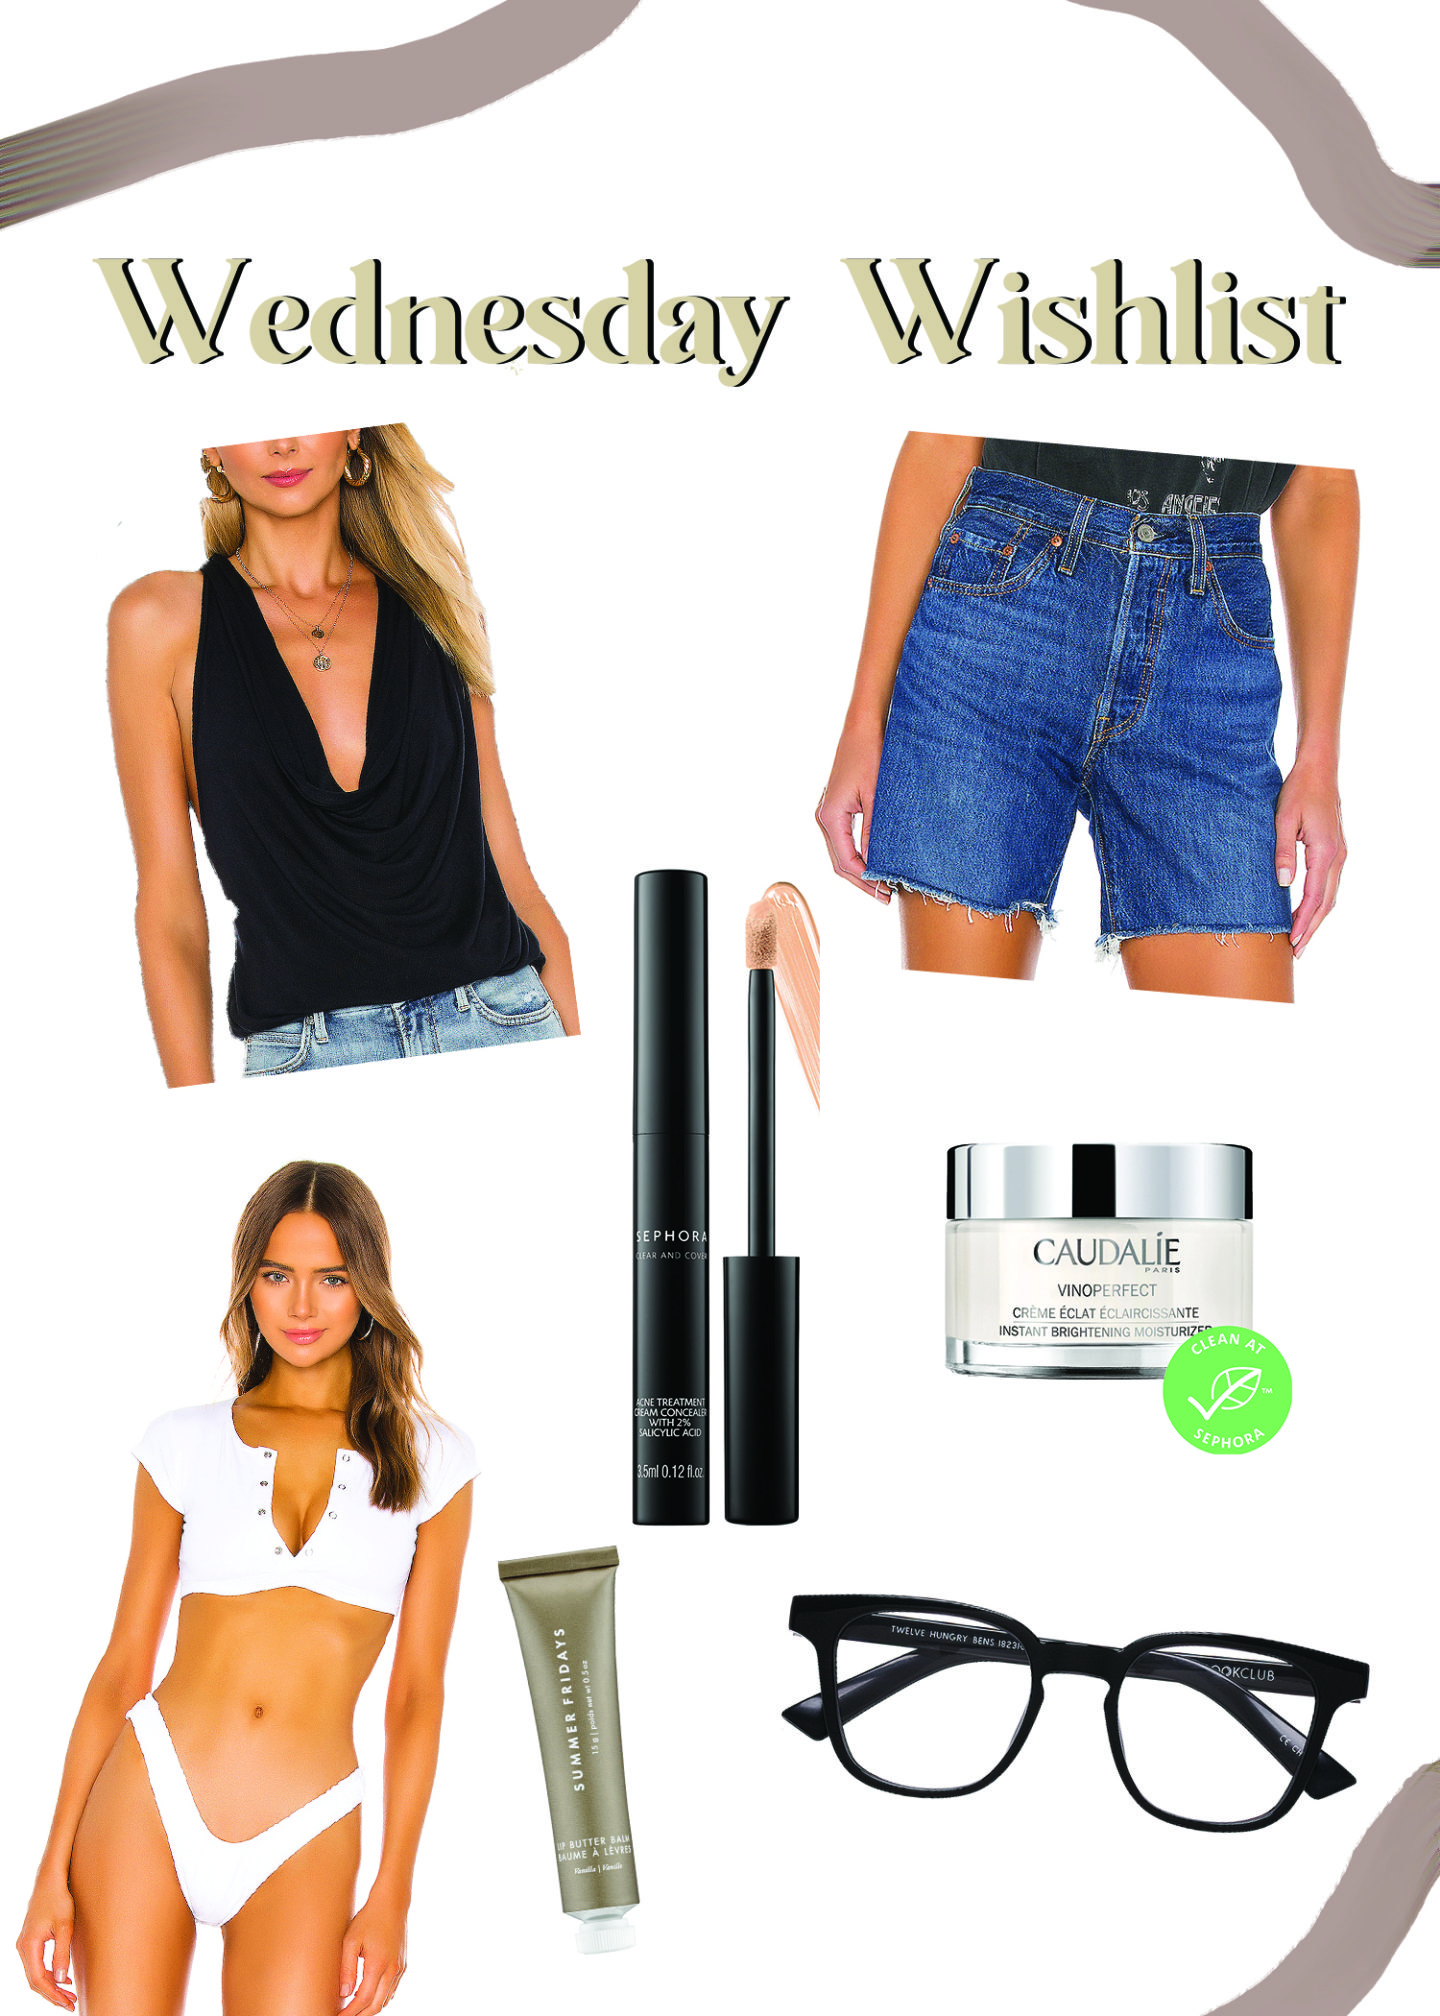 Wednesday Wishlist: Fashion and Beauty Finds Under $100